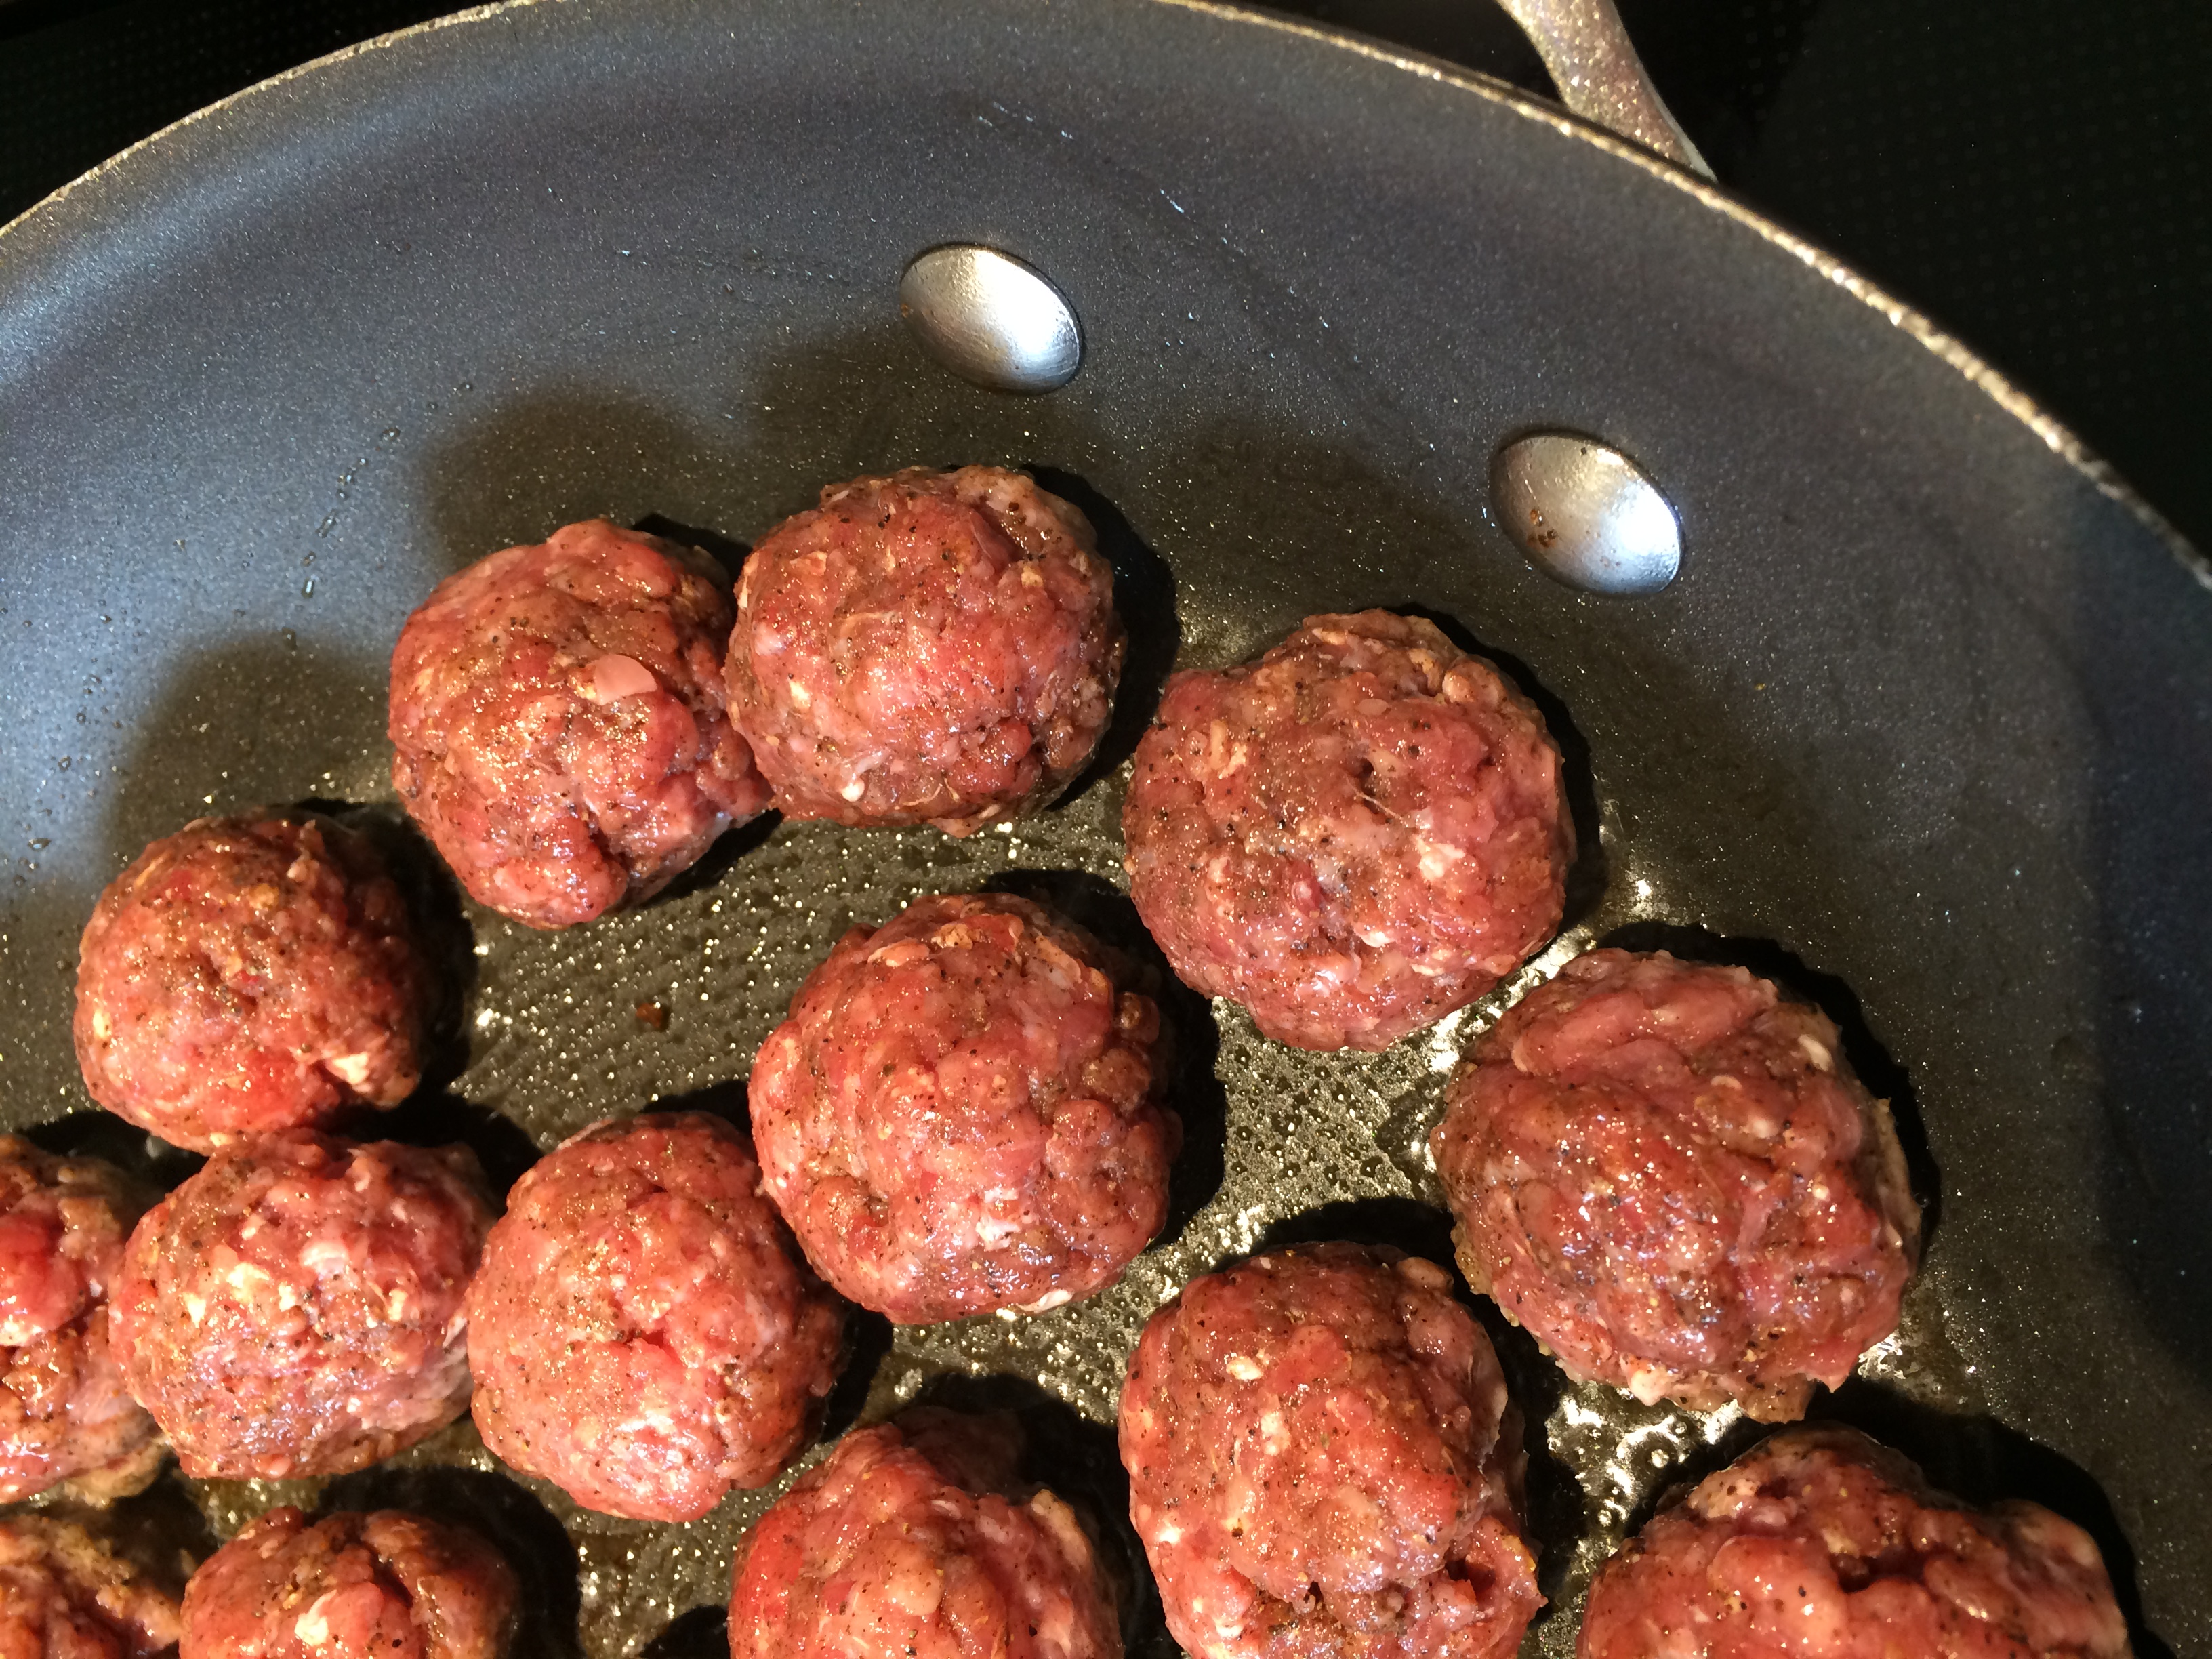 Spiced meatballs cooking in a sauce pan